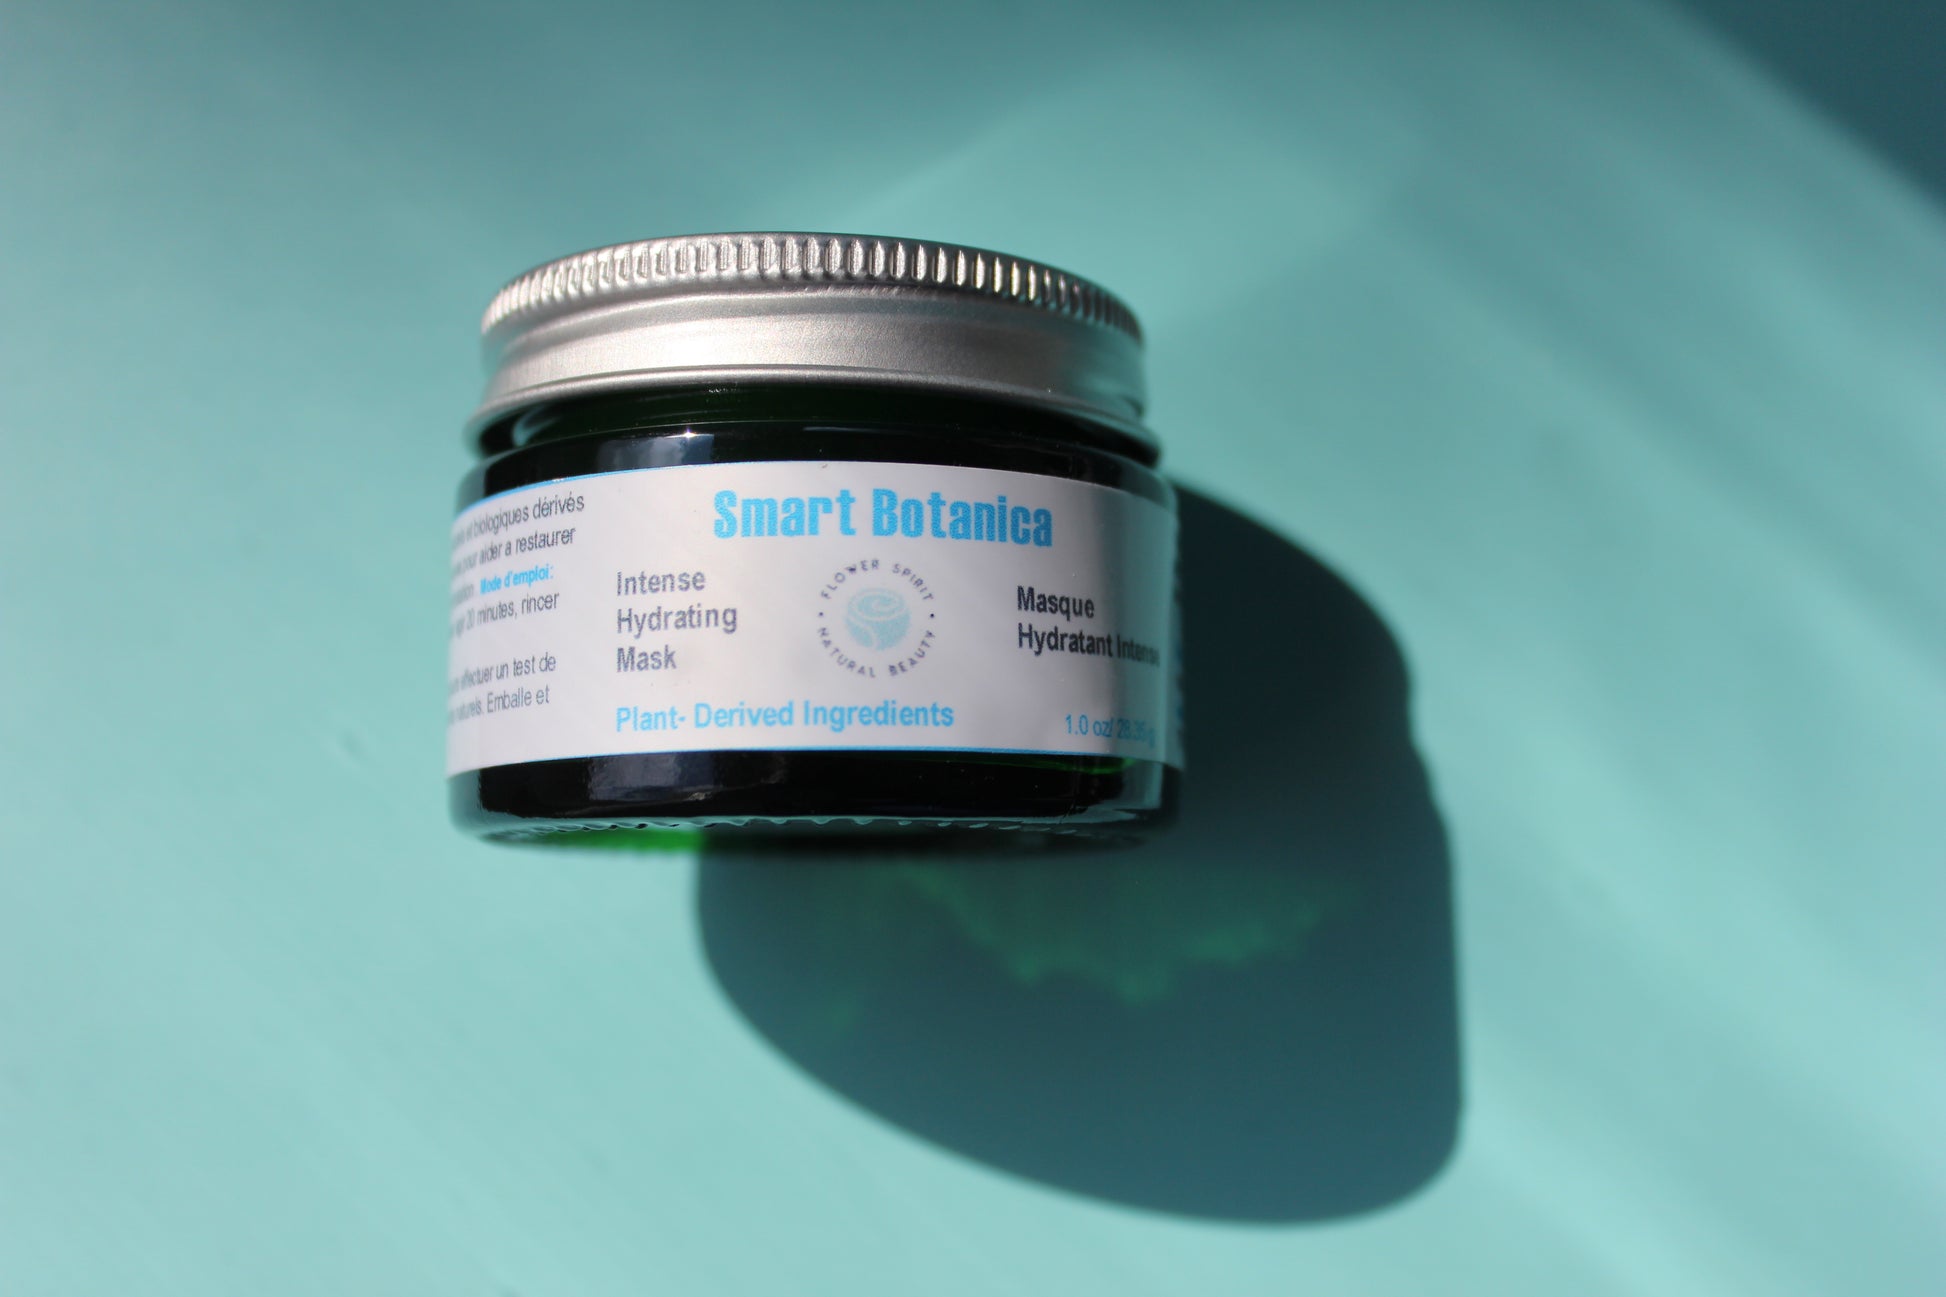 Intense Hydrating Mask, Smart Botanica by Flower Spirit Natural Beauty, Made with organic Aloe Vera Gel base and concentrated active ingredients that help restore skin's hydration. Natural and Organic Skincare.